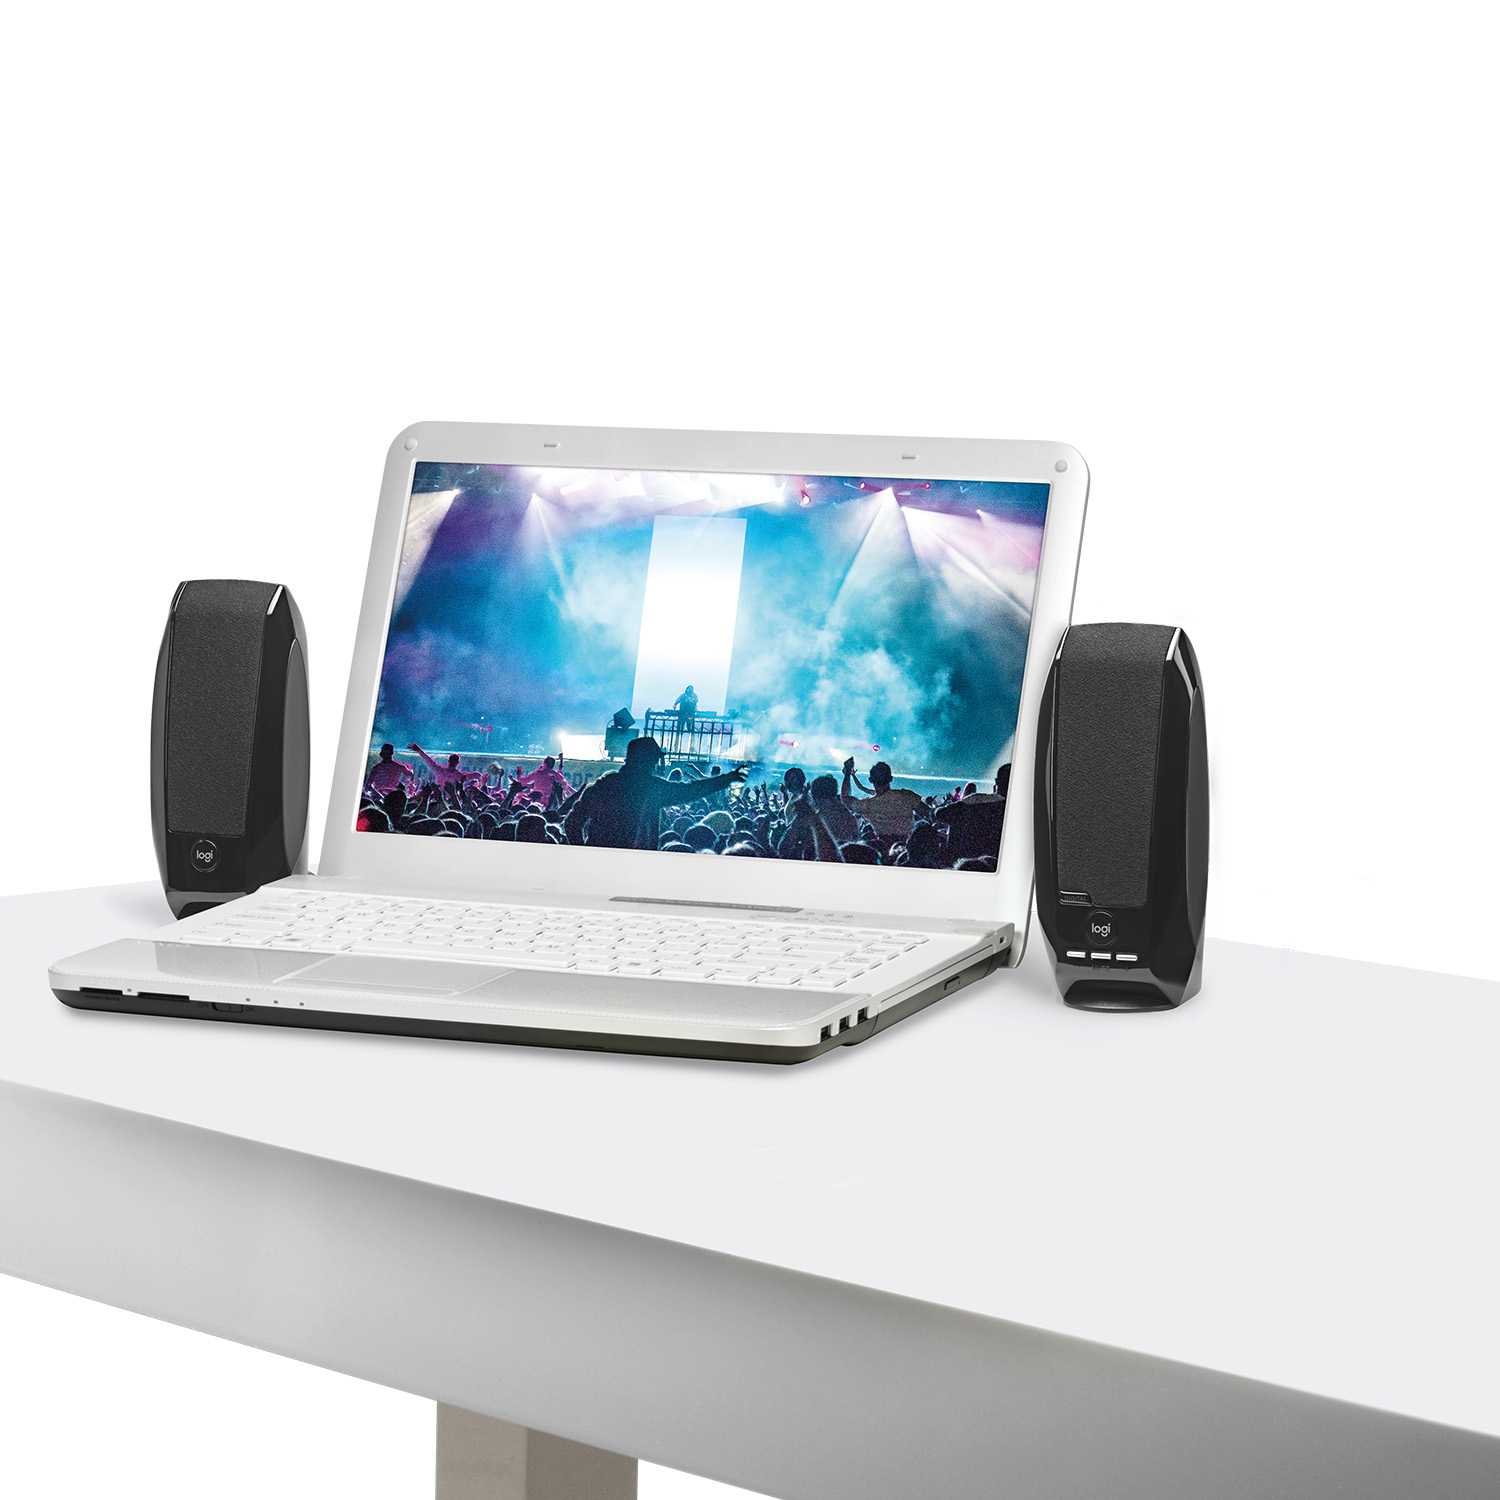 Logitech S150 USB Speakers with Digital Sound - image 5 of 5